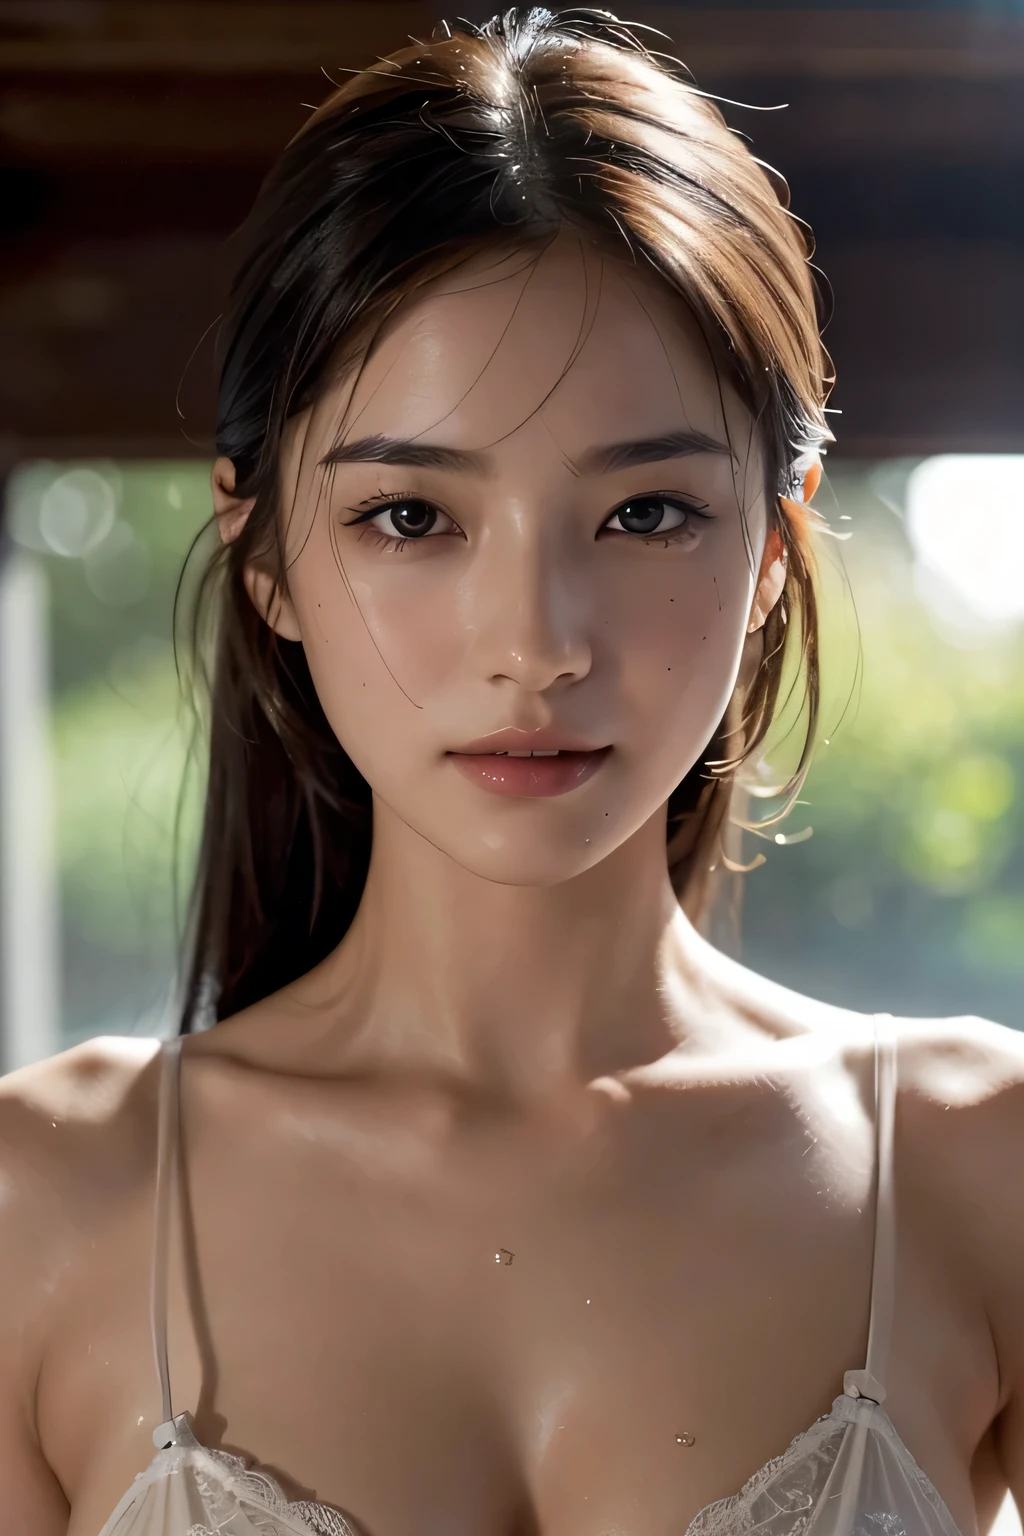 highest quality、masterpiece, ultra high resolution、(Photoreal:1.4)、RAW photo、1 girl、shiny skin, wet body, dramatic lighting, RAW photo, table top:1.3, Super high resolution:1.0, sharp focus:1.2, beautiful woman with perfect figure:1.4, thin abs:1.2, wet body:1.5, Highly detailed face and skin textures, fine eyes, double eyelid, Perfect face balance, Clean system, 笑face, Soft light in a beautiful studio, rim light, vivid details, surreal, fine and beautiful skin, realistic skin, rubber suit, beautiful face, Beautiful woman, high solution face, Soft texture, Nude, close, face